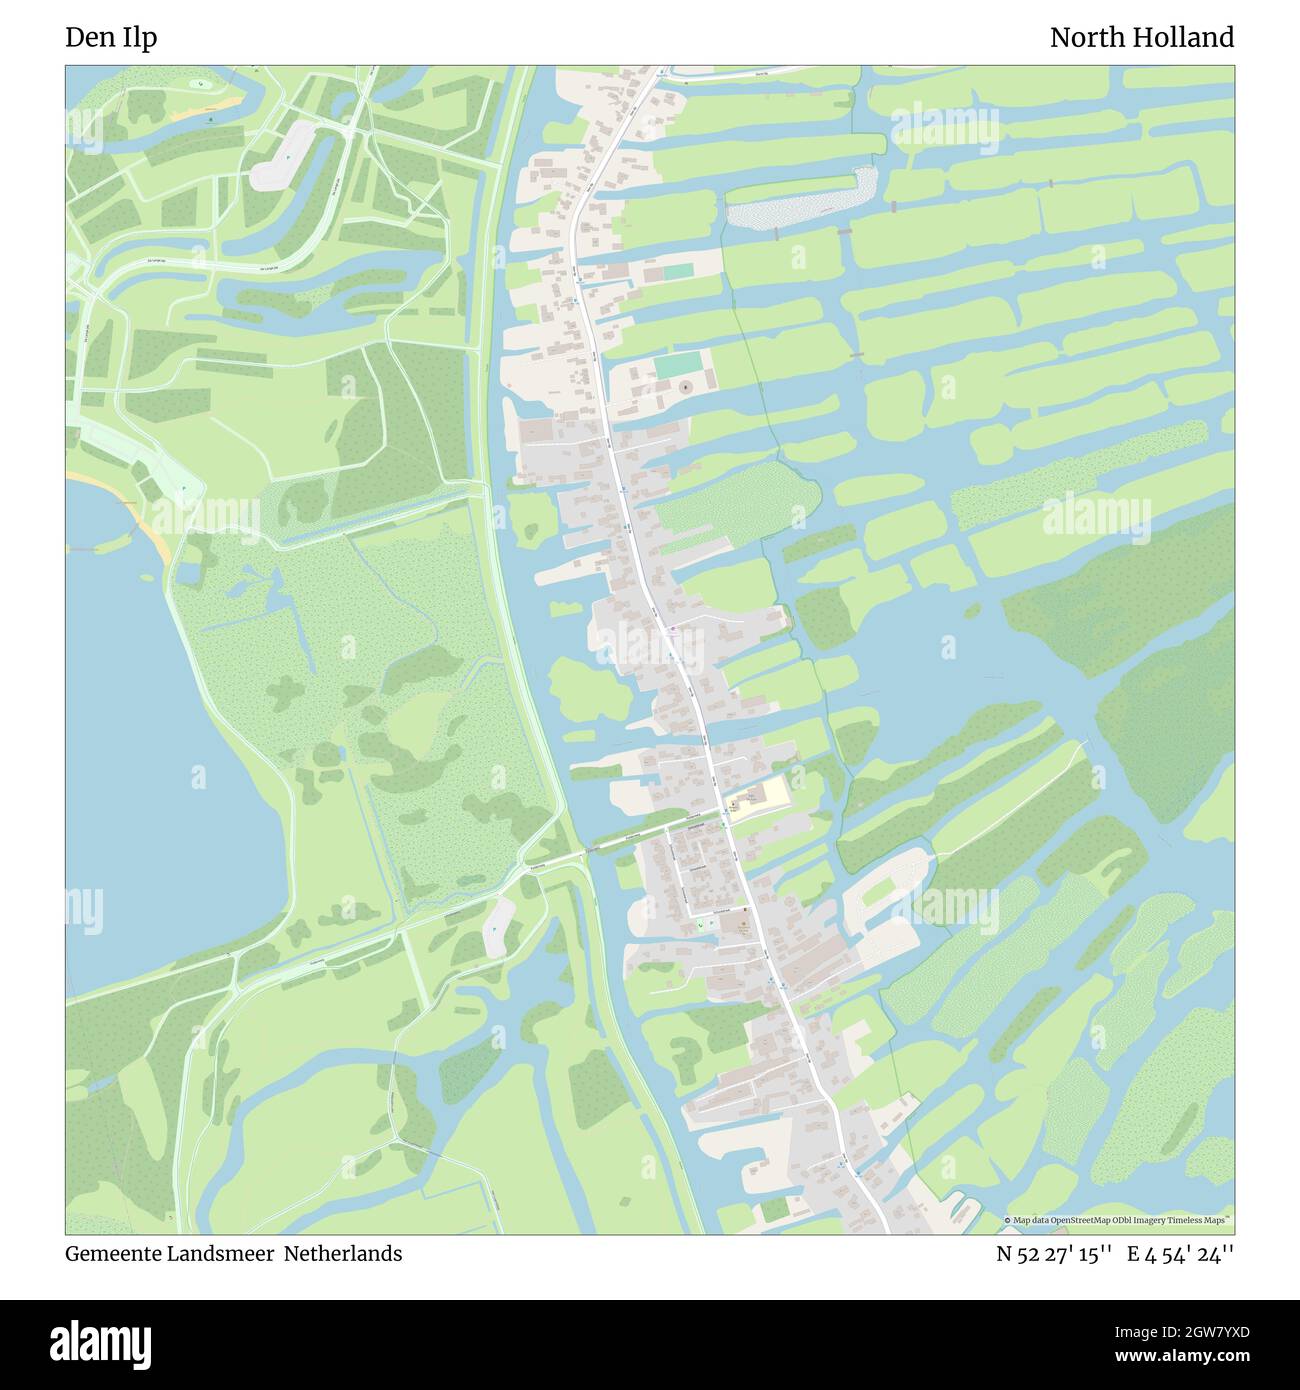 Den Ilp, Gemeente Landsmeer, Netherlands, North Holland, N 52 27' 15'', E 4 54' 24'', map, Timeless Map published in 2021. Travelers, explorers and adventurers like Florence Nightingale, David Livingstone, Ernest Shackleton, Lewis and Clark and Sherlock Holmes relied on maps to plan travels to the world's most remote corners, Timeless Maps is mapping most locations on the globe, showing the achievement of great dreams Stock Photo